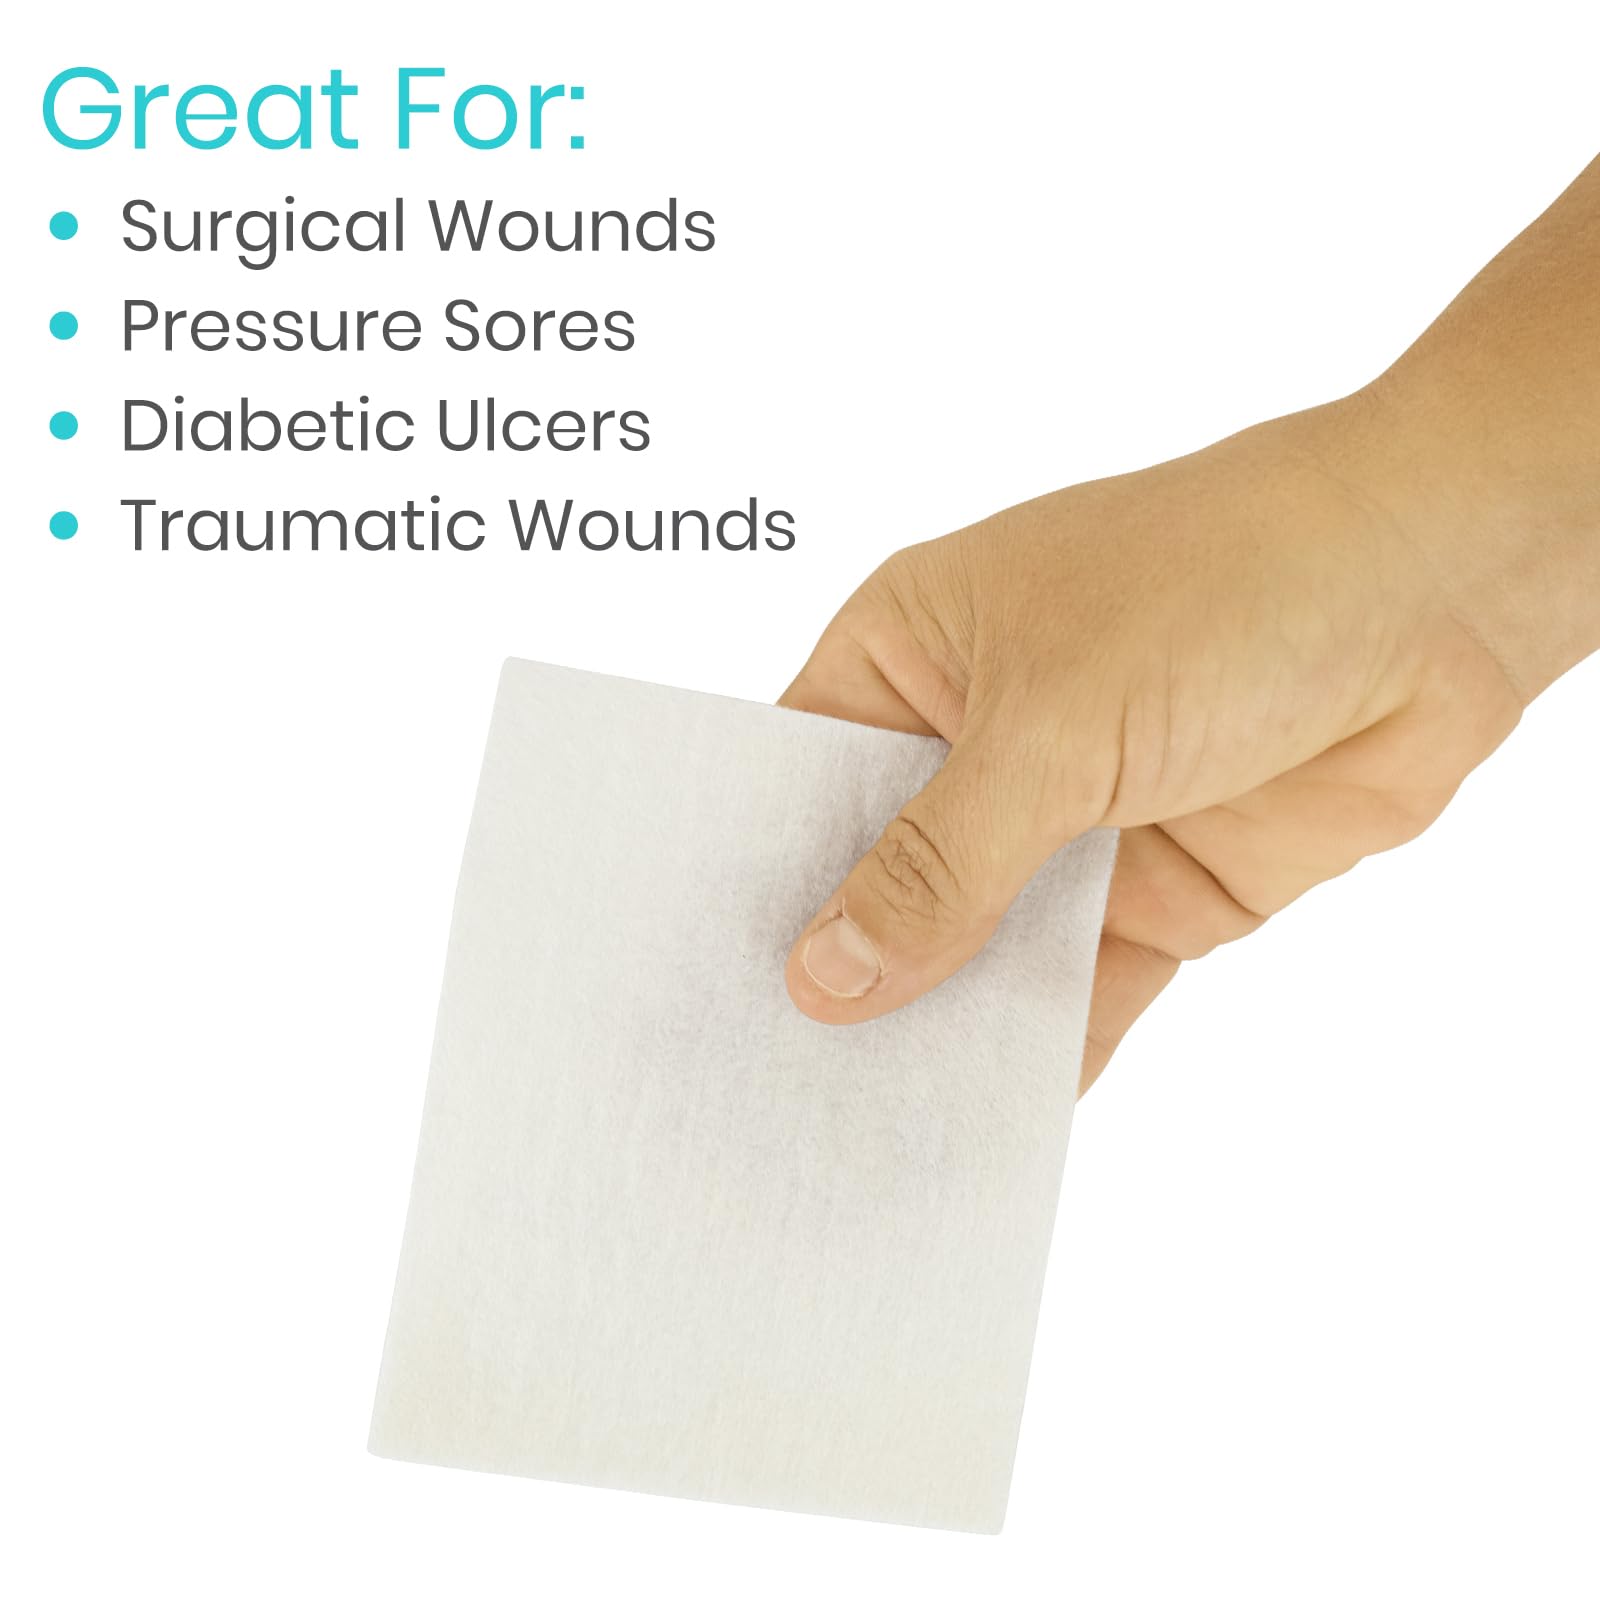 ViveCare Silver Calcium Alginate Wound Dressing - Sterile 4x4 Medical Gauze Pad - Wound Care for Burns, Cysts and Ulcer Treatment - Highly Absorbent Individual Patch - Non-Stick Padding